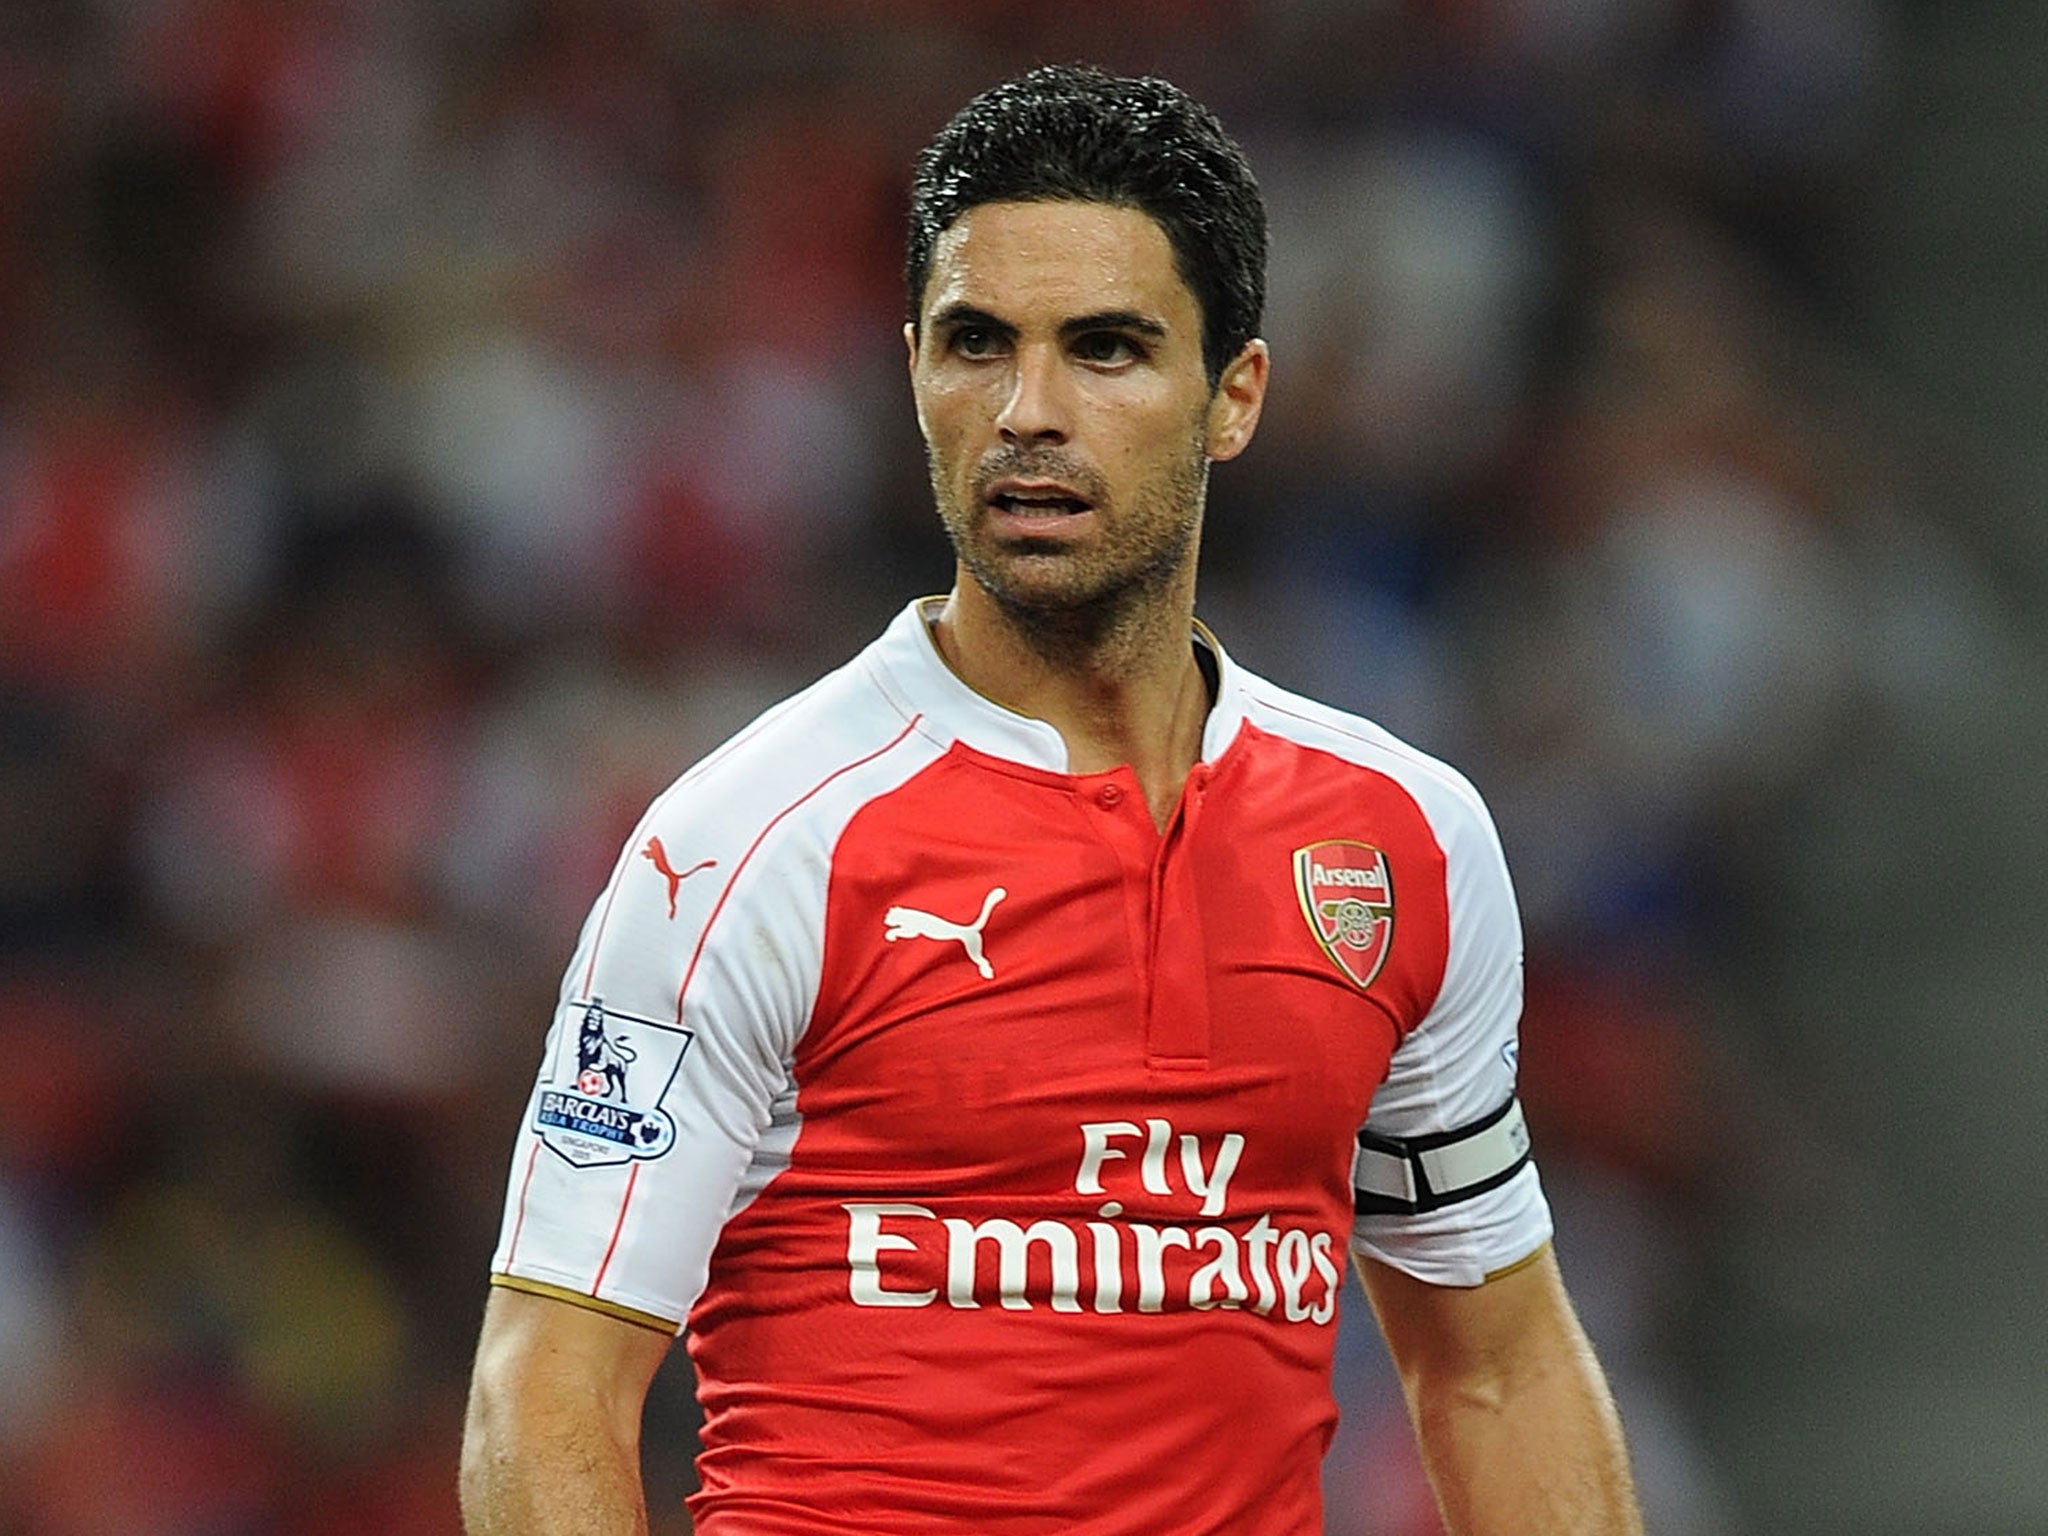 Related Keywords & Suggestions for mikel arteta